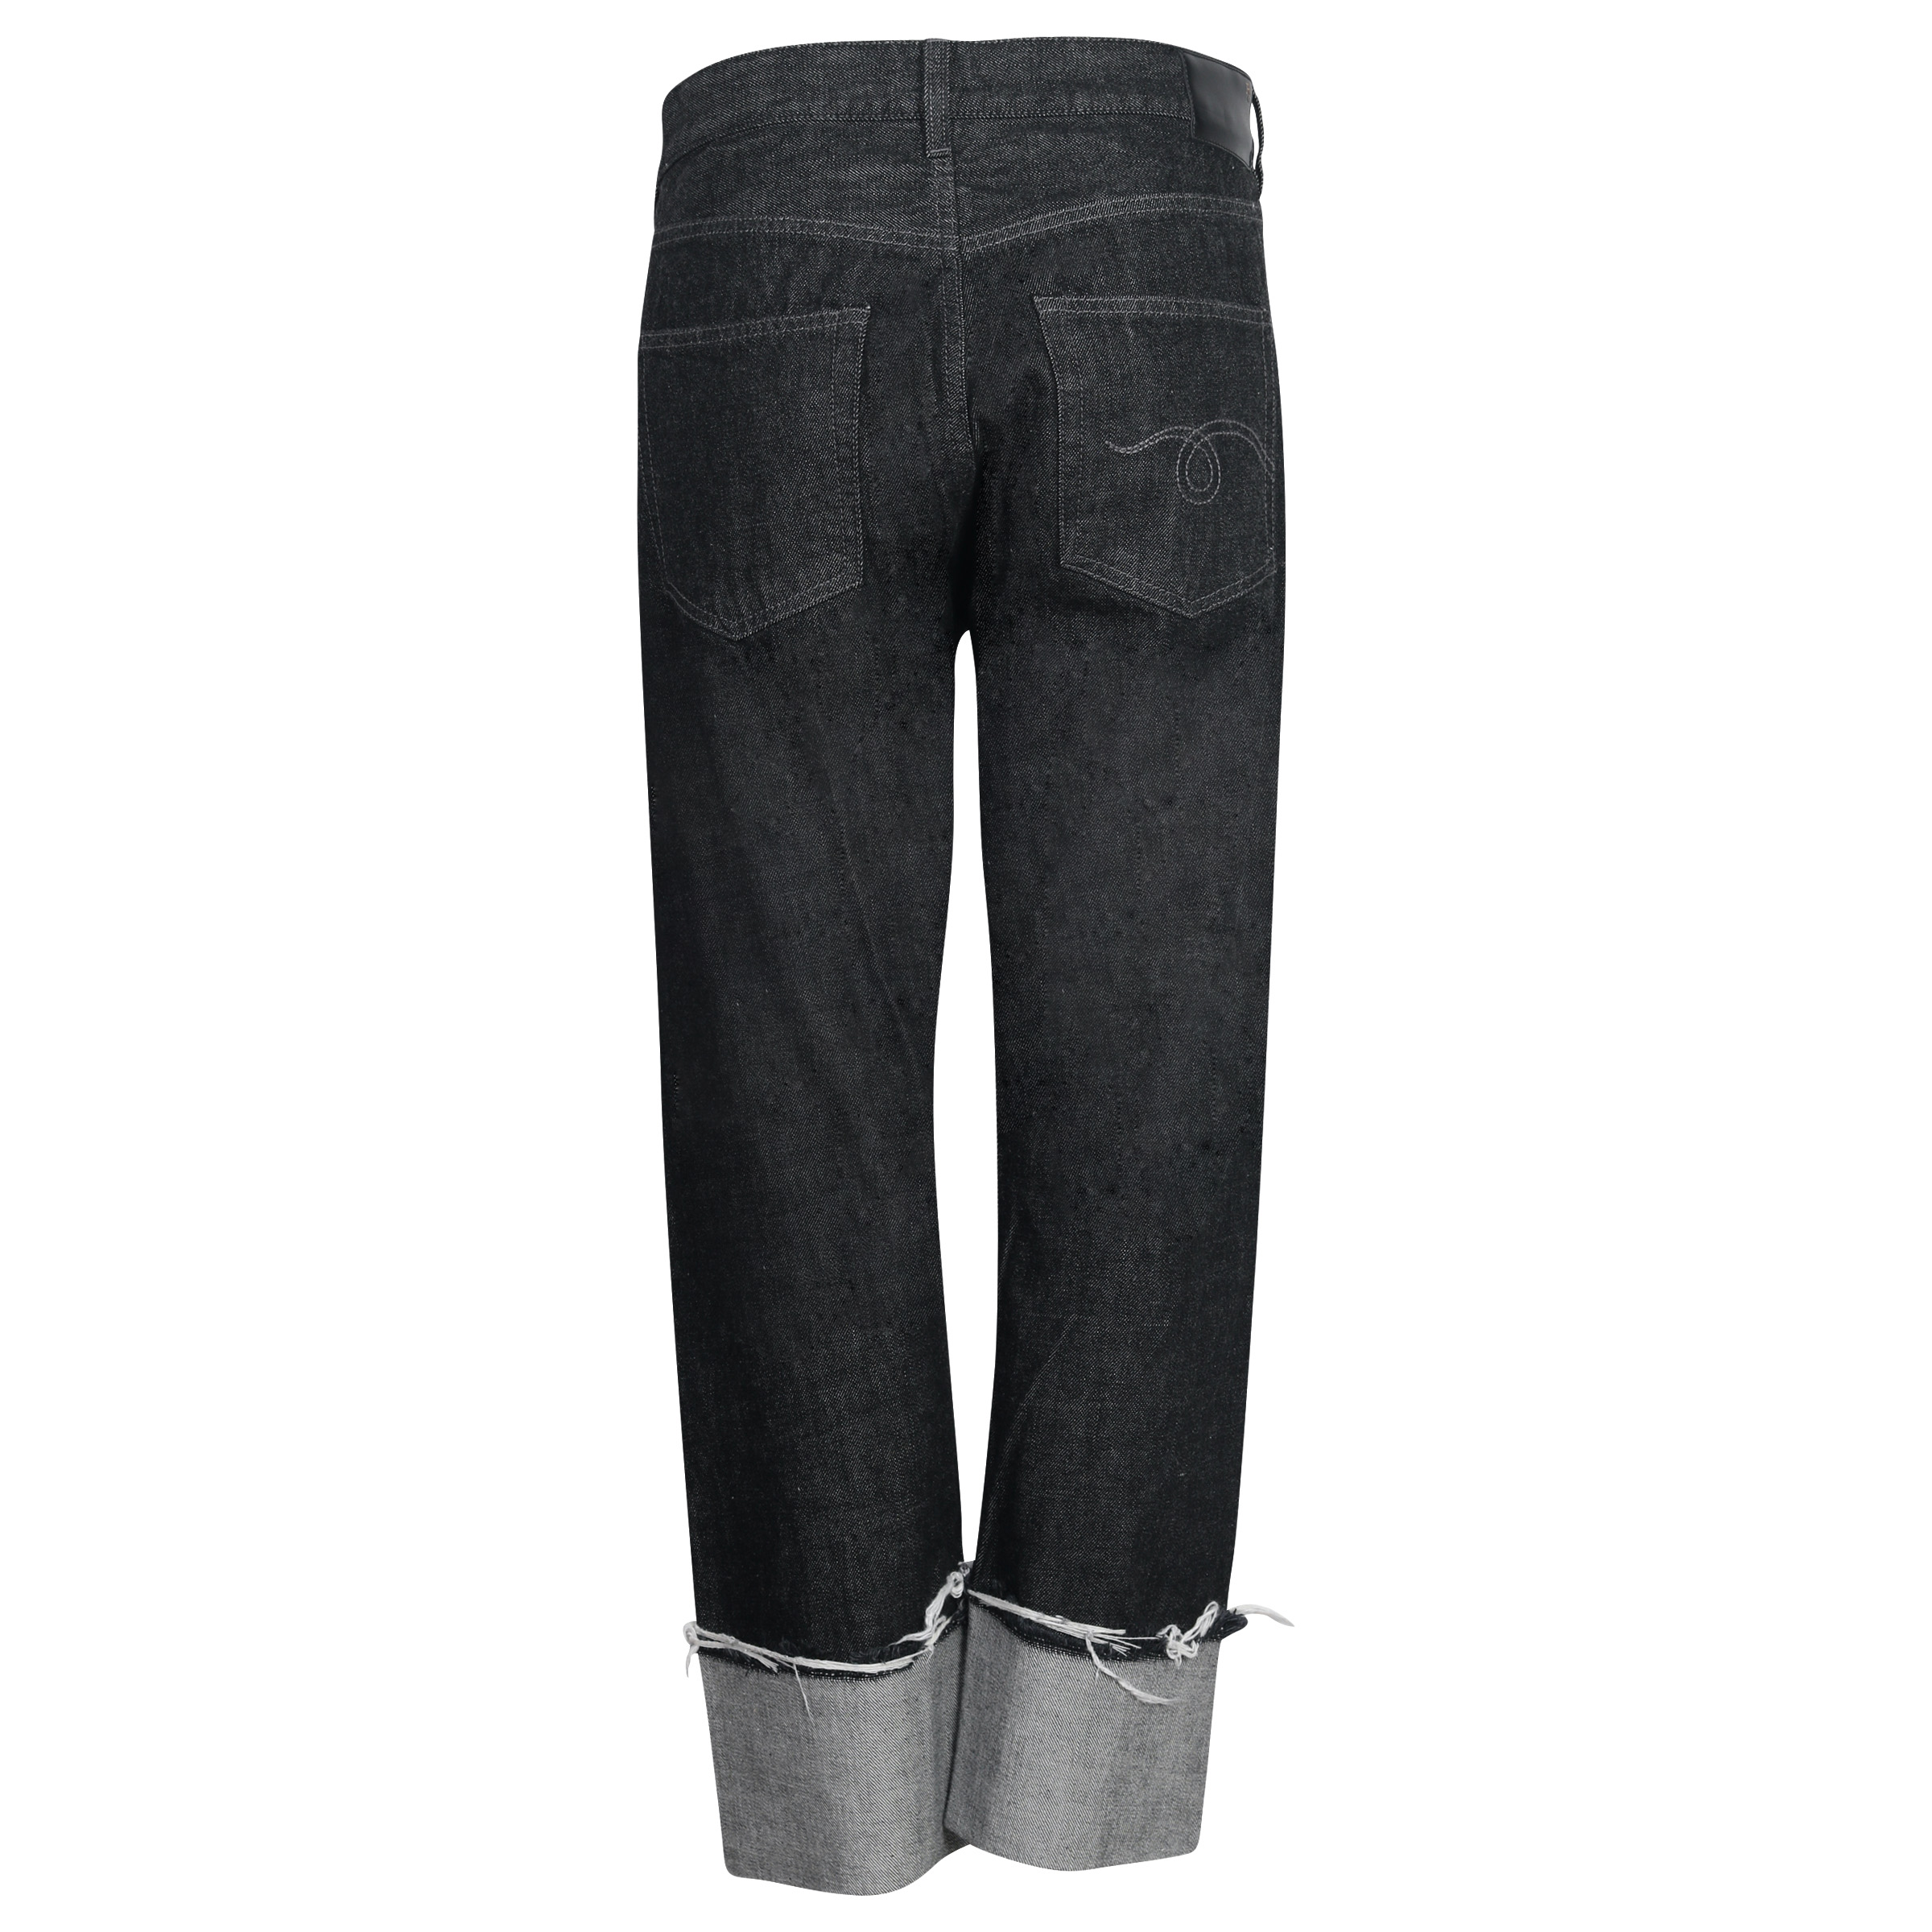 R13 Cross Over Jeans with Cuff in Black 26